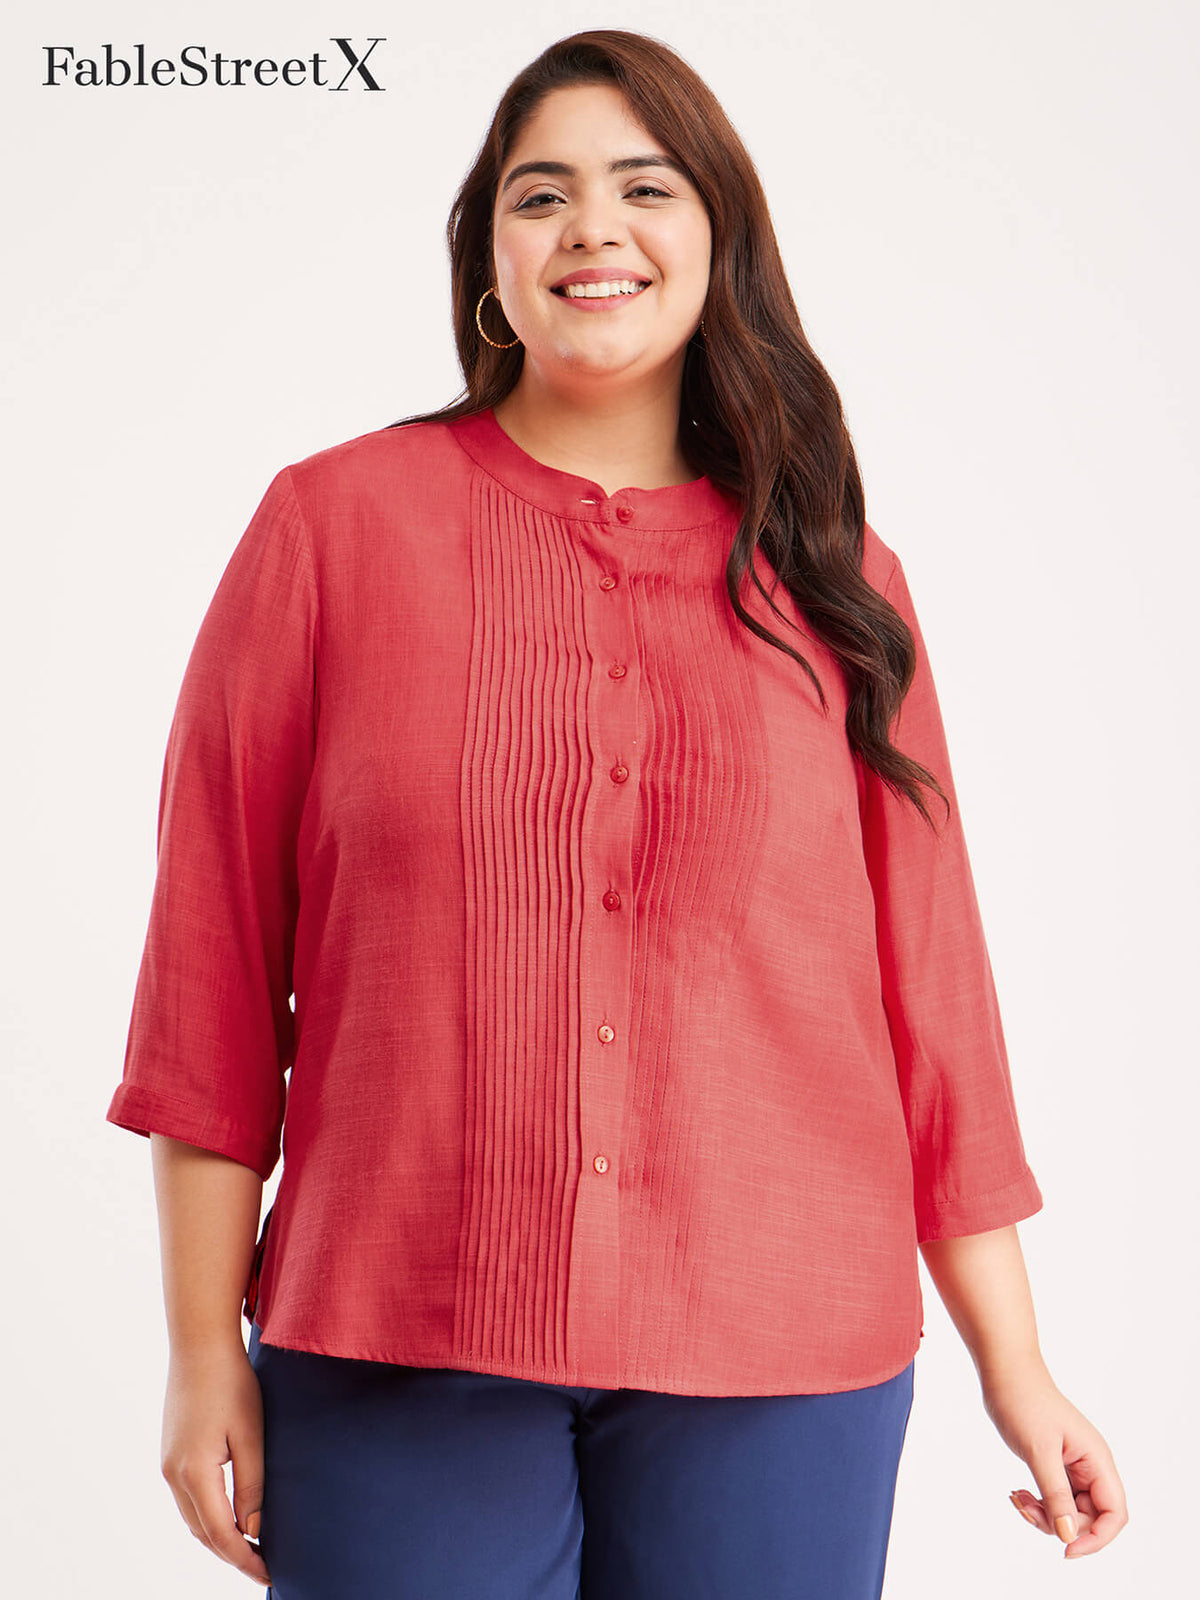 Pintuck Detail Top - Coral Red